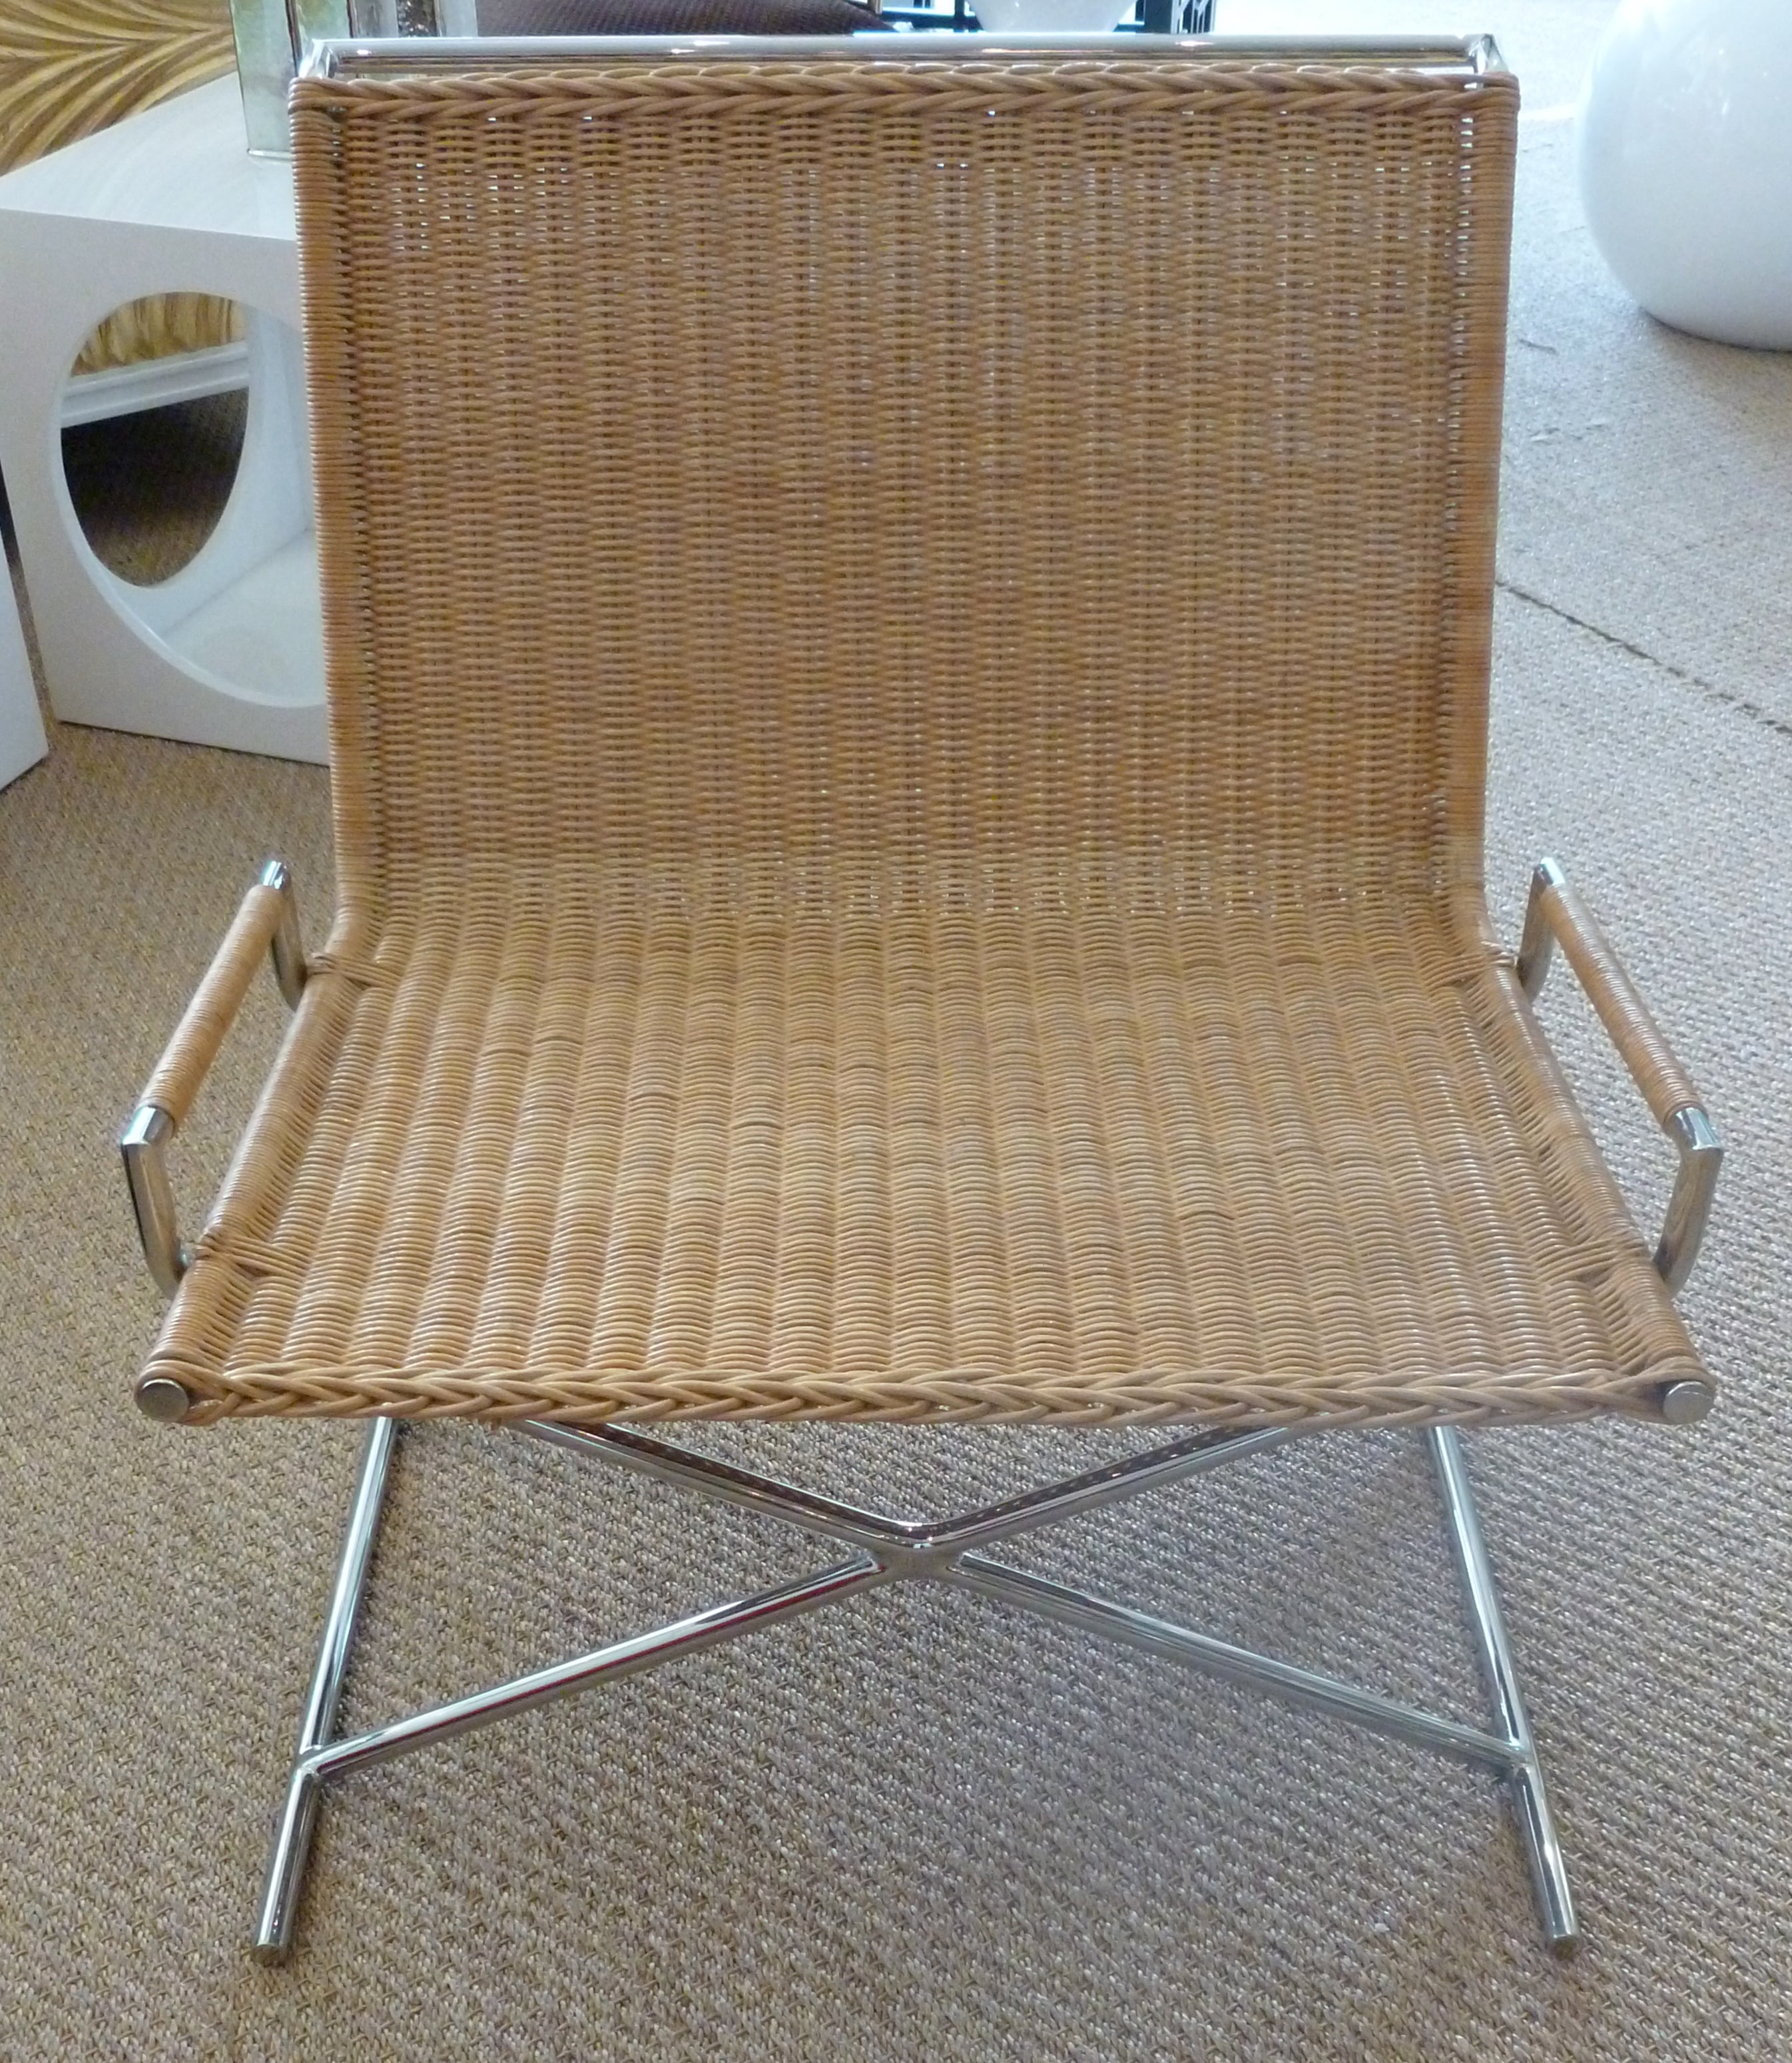 Pair of Ward Bennett Sled Chairs